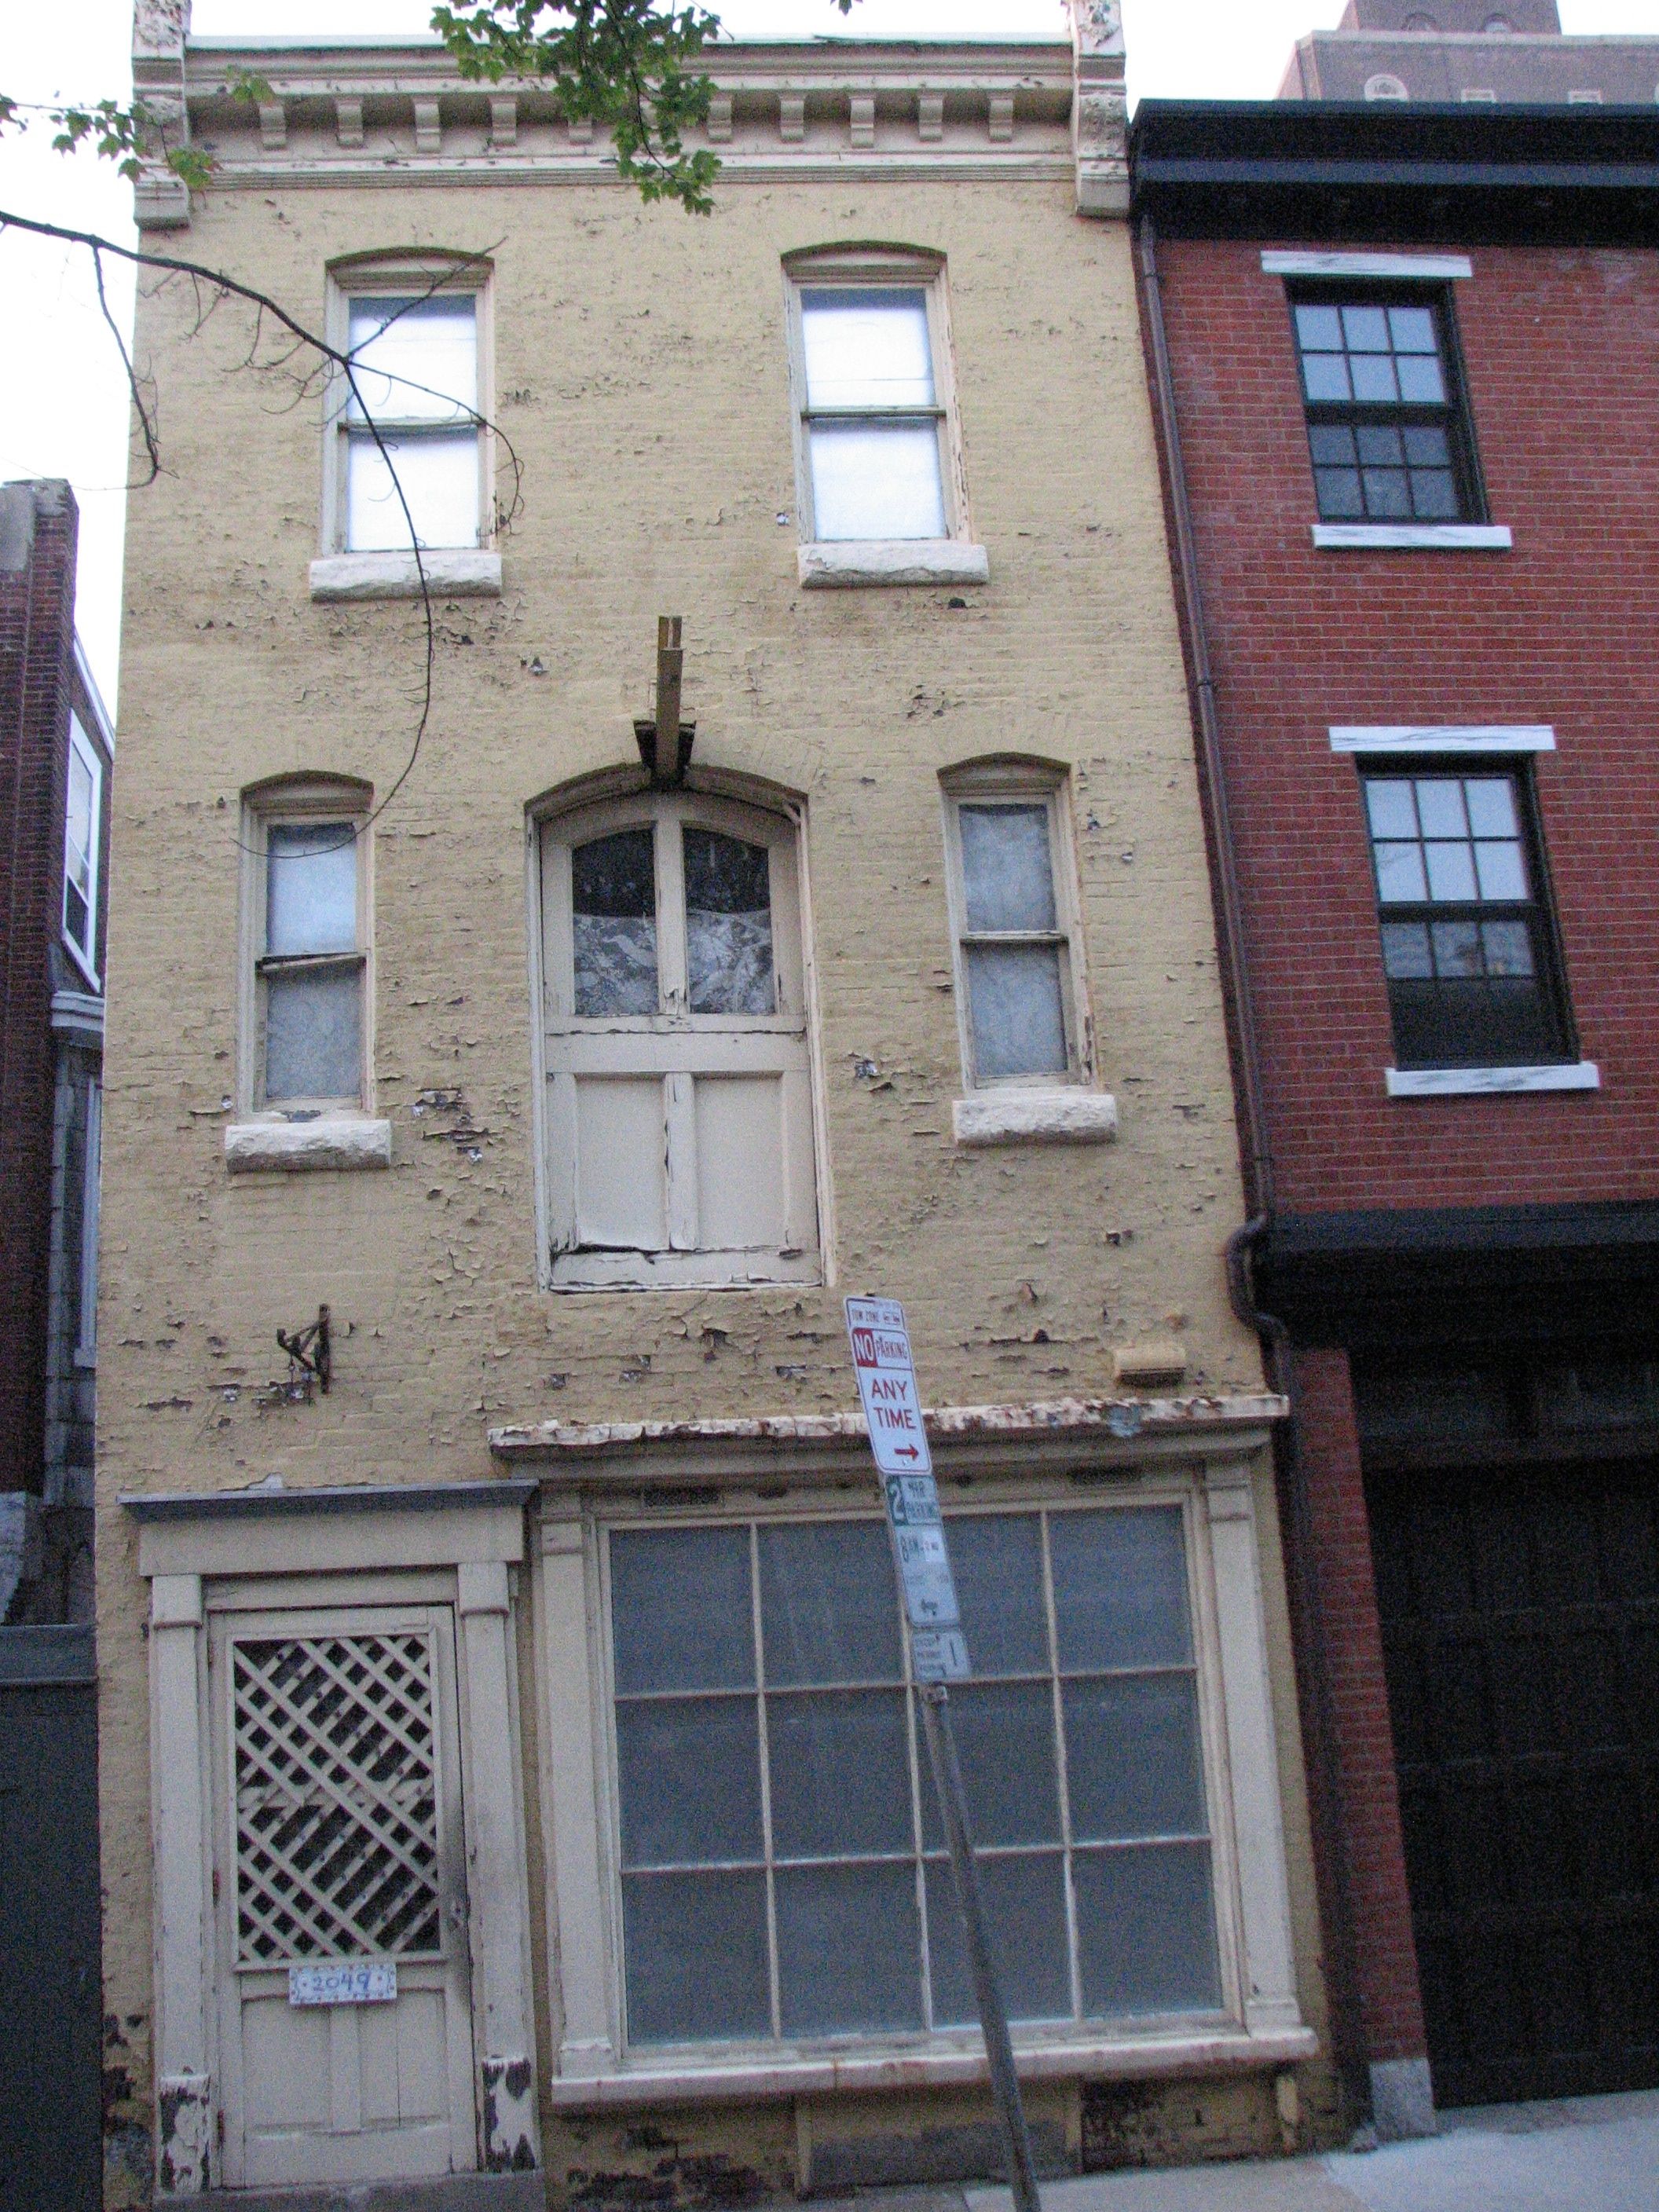 The building at 2049 began as a carriage house and became a storefront.